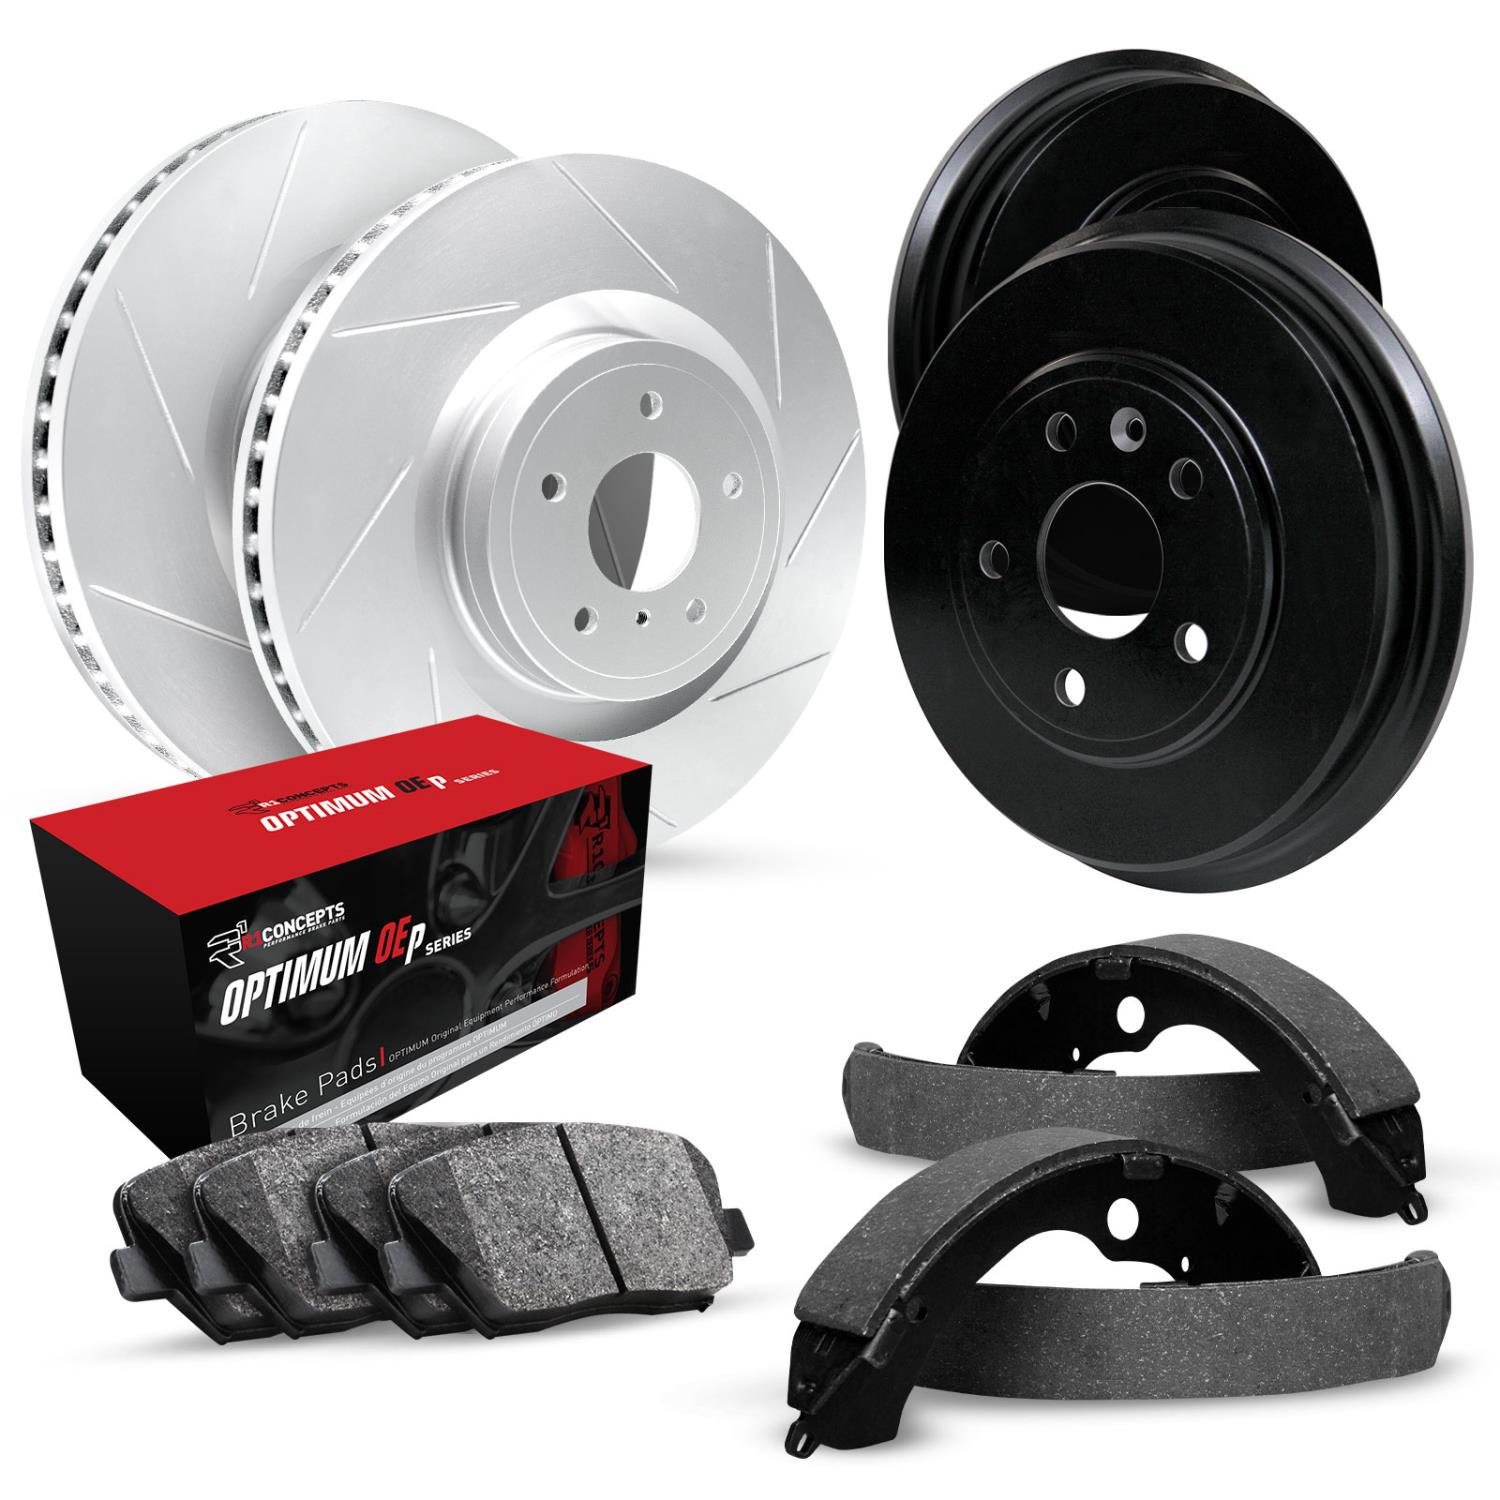 GEO-Carbon Slotted Brake Rotor & Drum Set w/Optimum OE Pads & Shoes, 1976-1978 GM, Position: Front & Rear